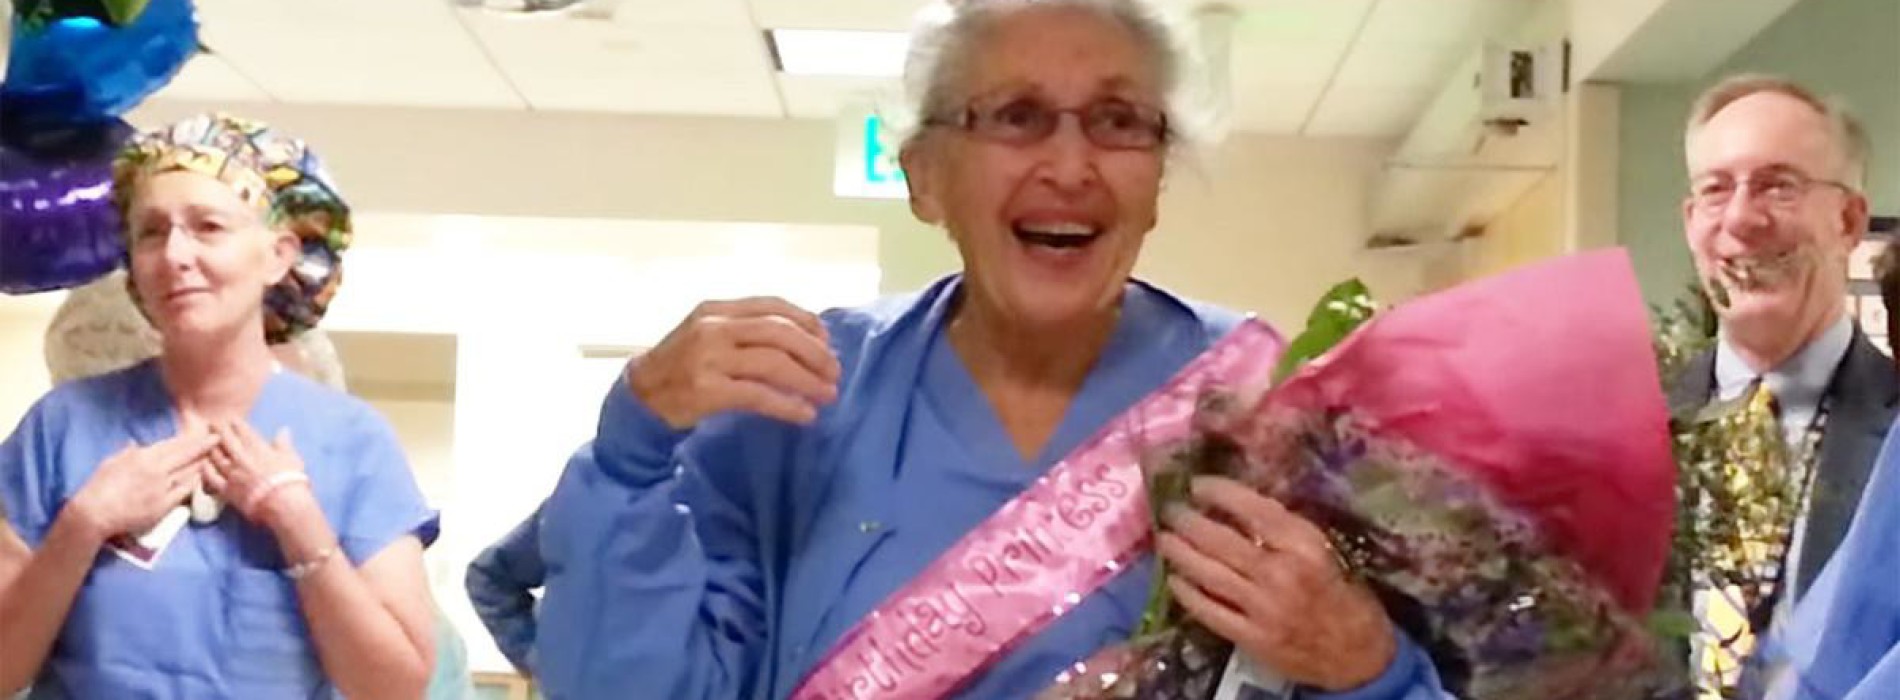 Oldest nurse in the United States celebrated her 90th birthday last week, and is still working!